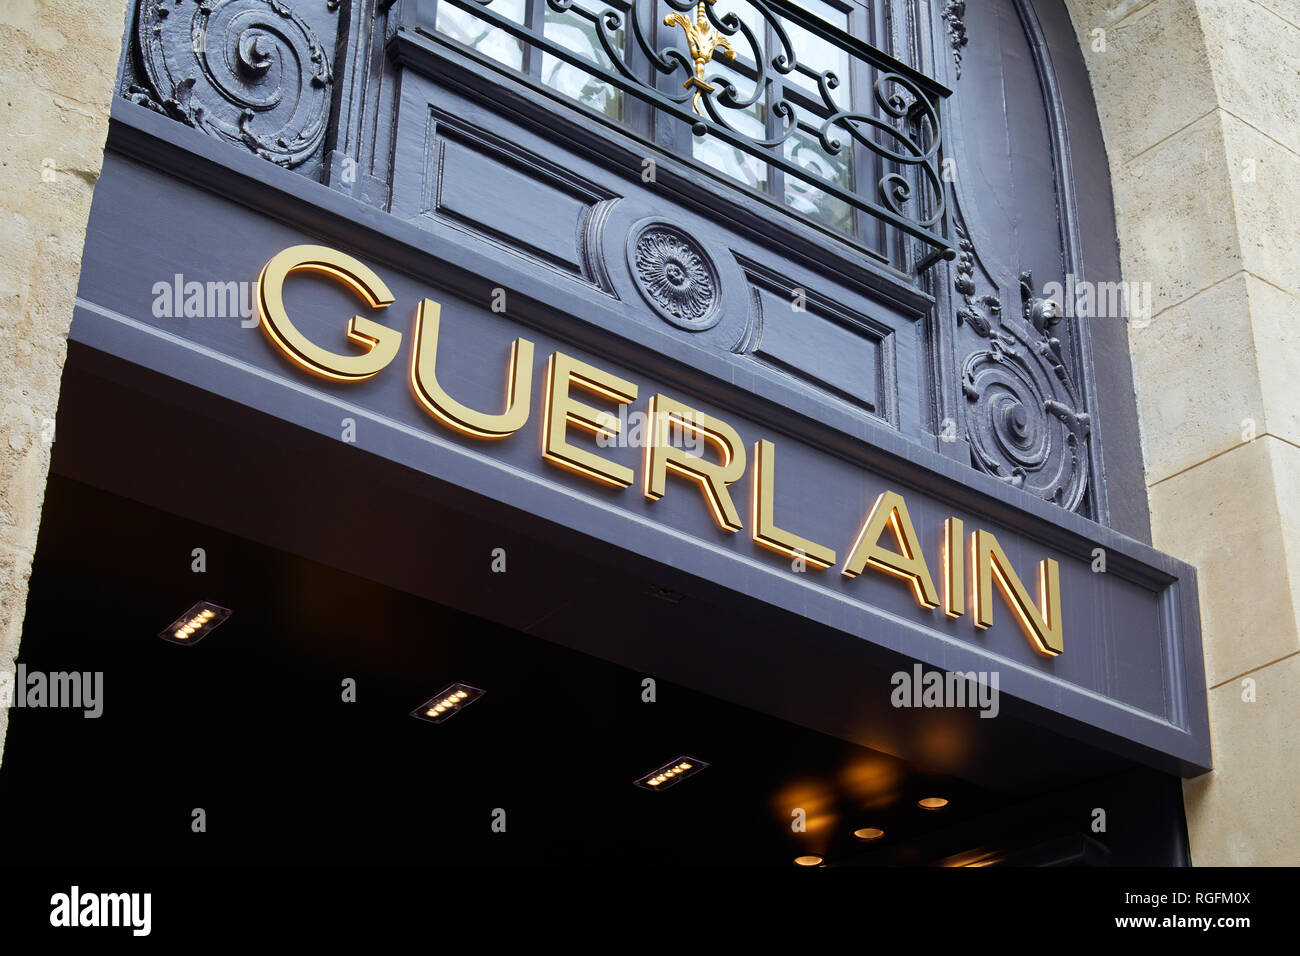 My Visit to the Guerlain Champs Élysées Flagship Store, a Must Do in Paris  - Just head over, heels